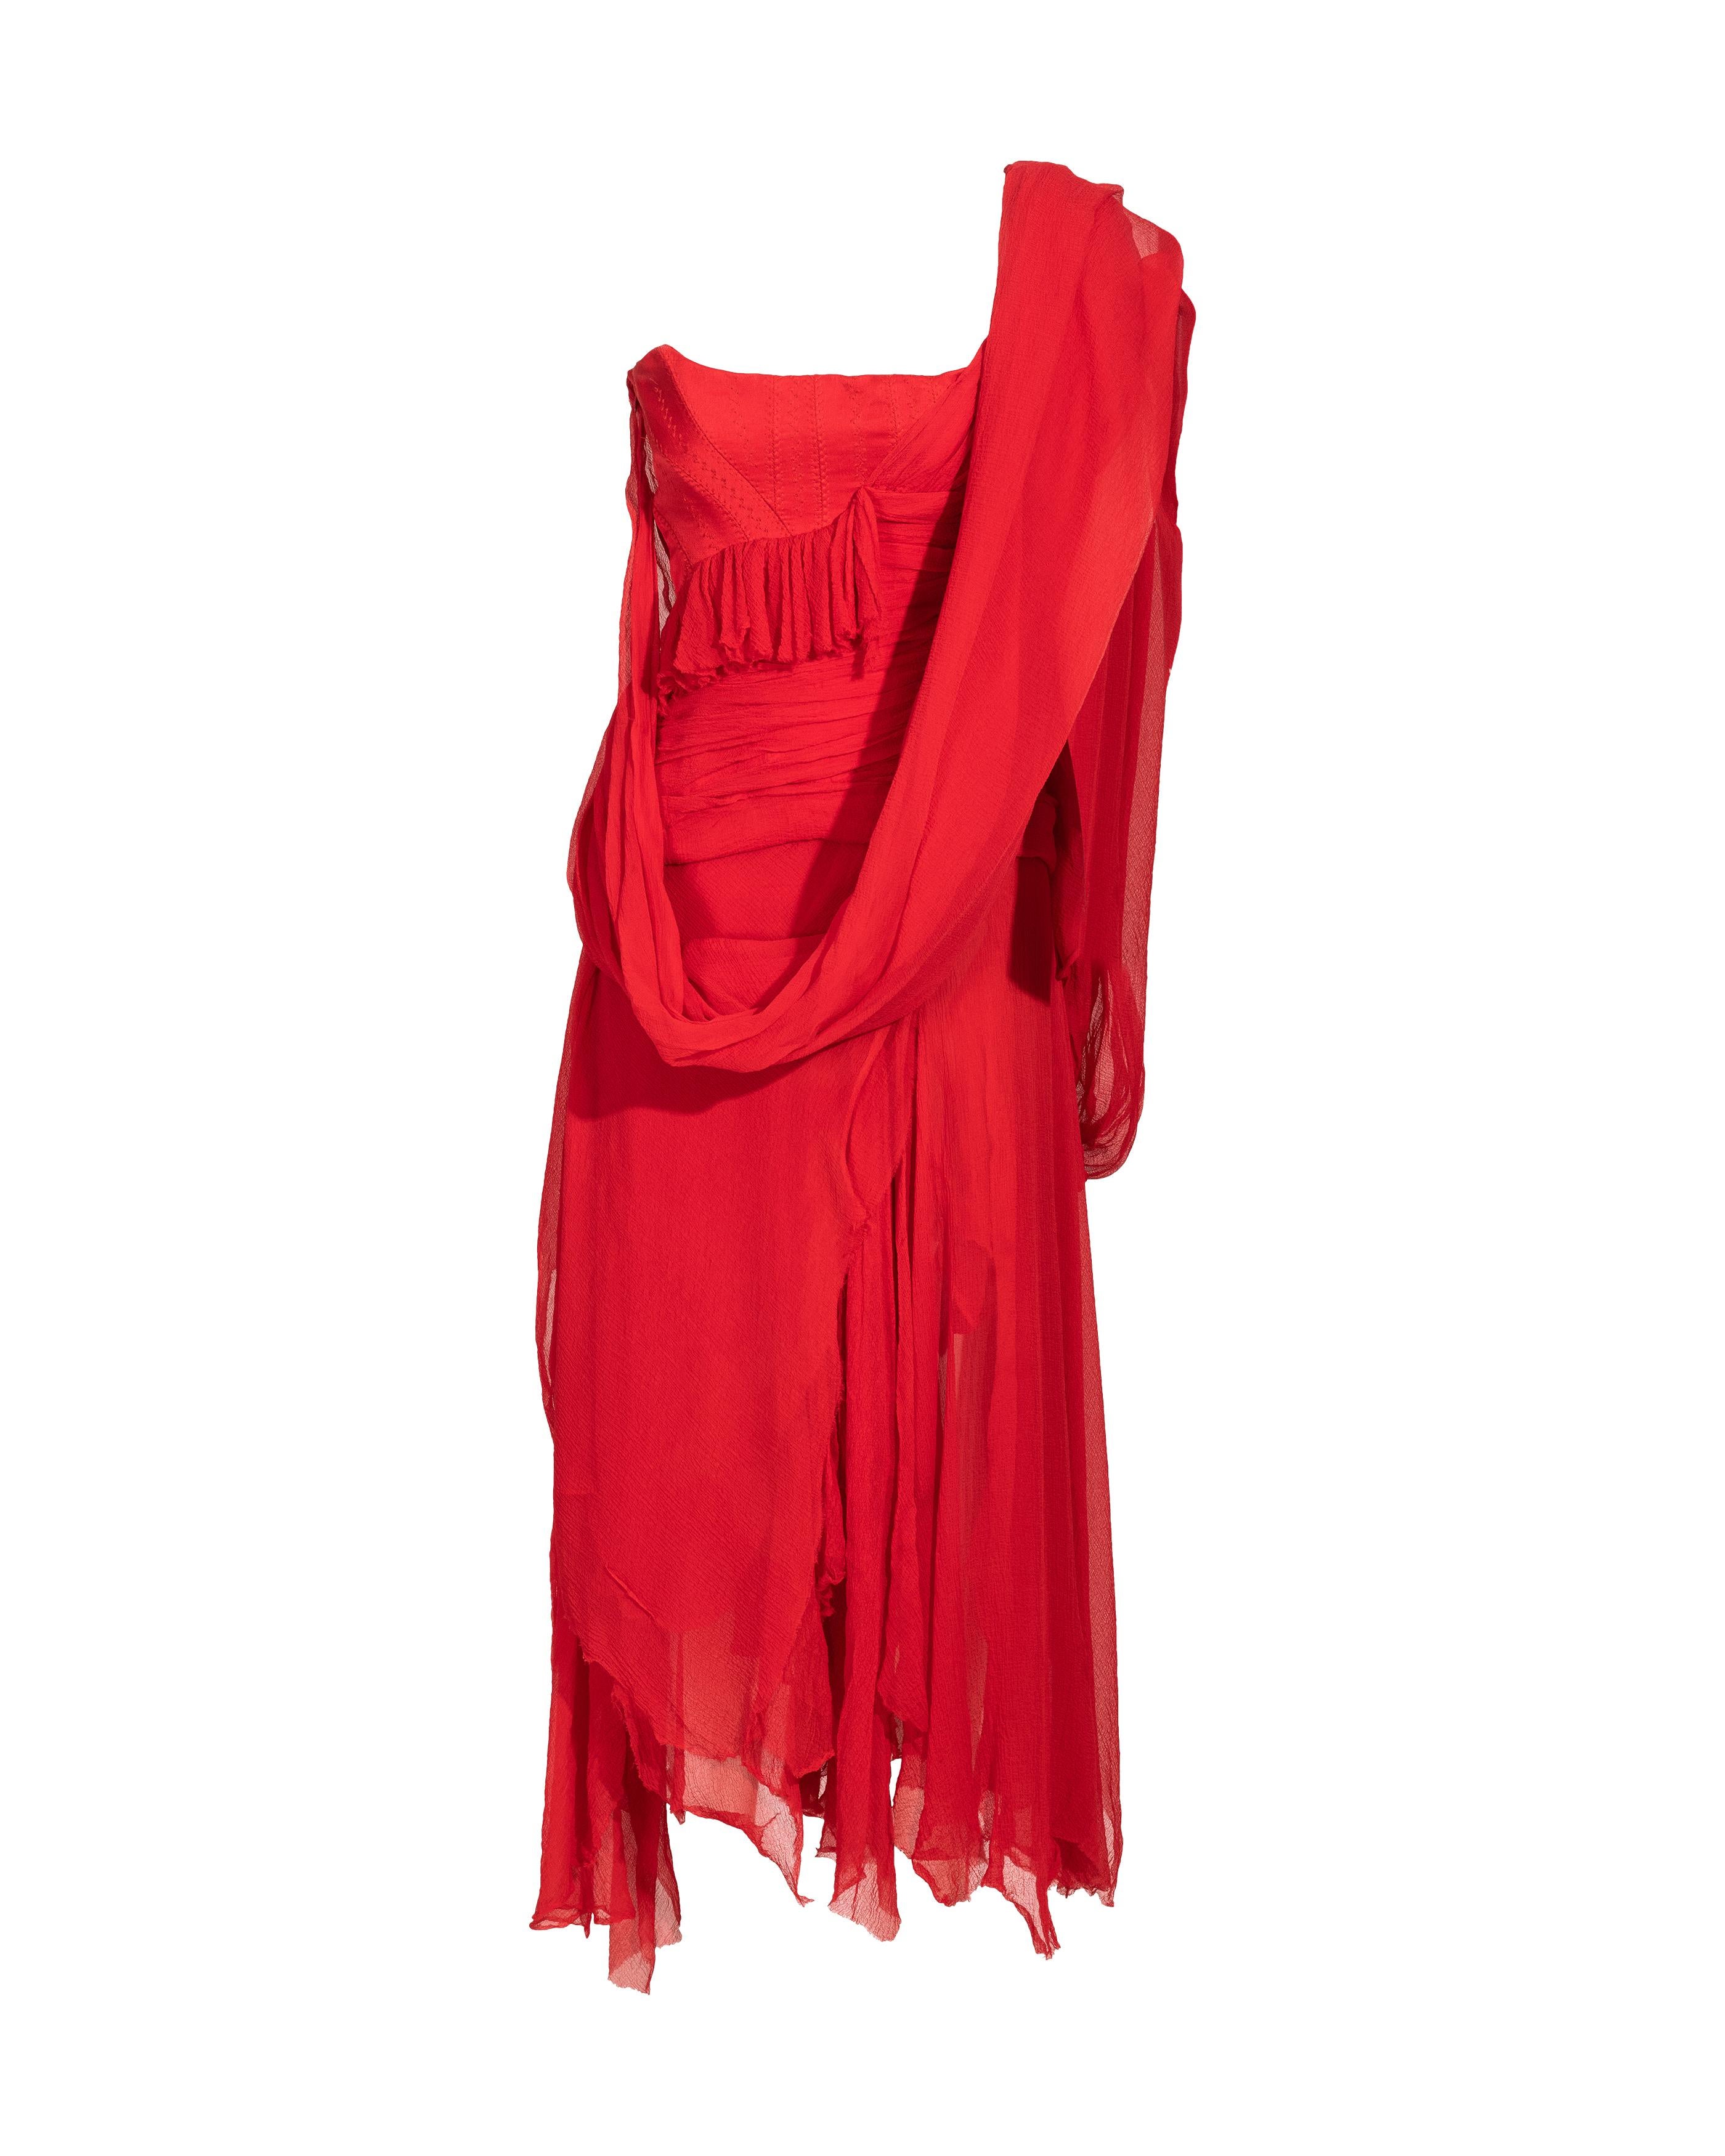 S/S 2003 Alexander McQueen  'Irere' Collection Red Silk Chiffon Gown with Sash 12